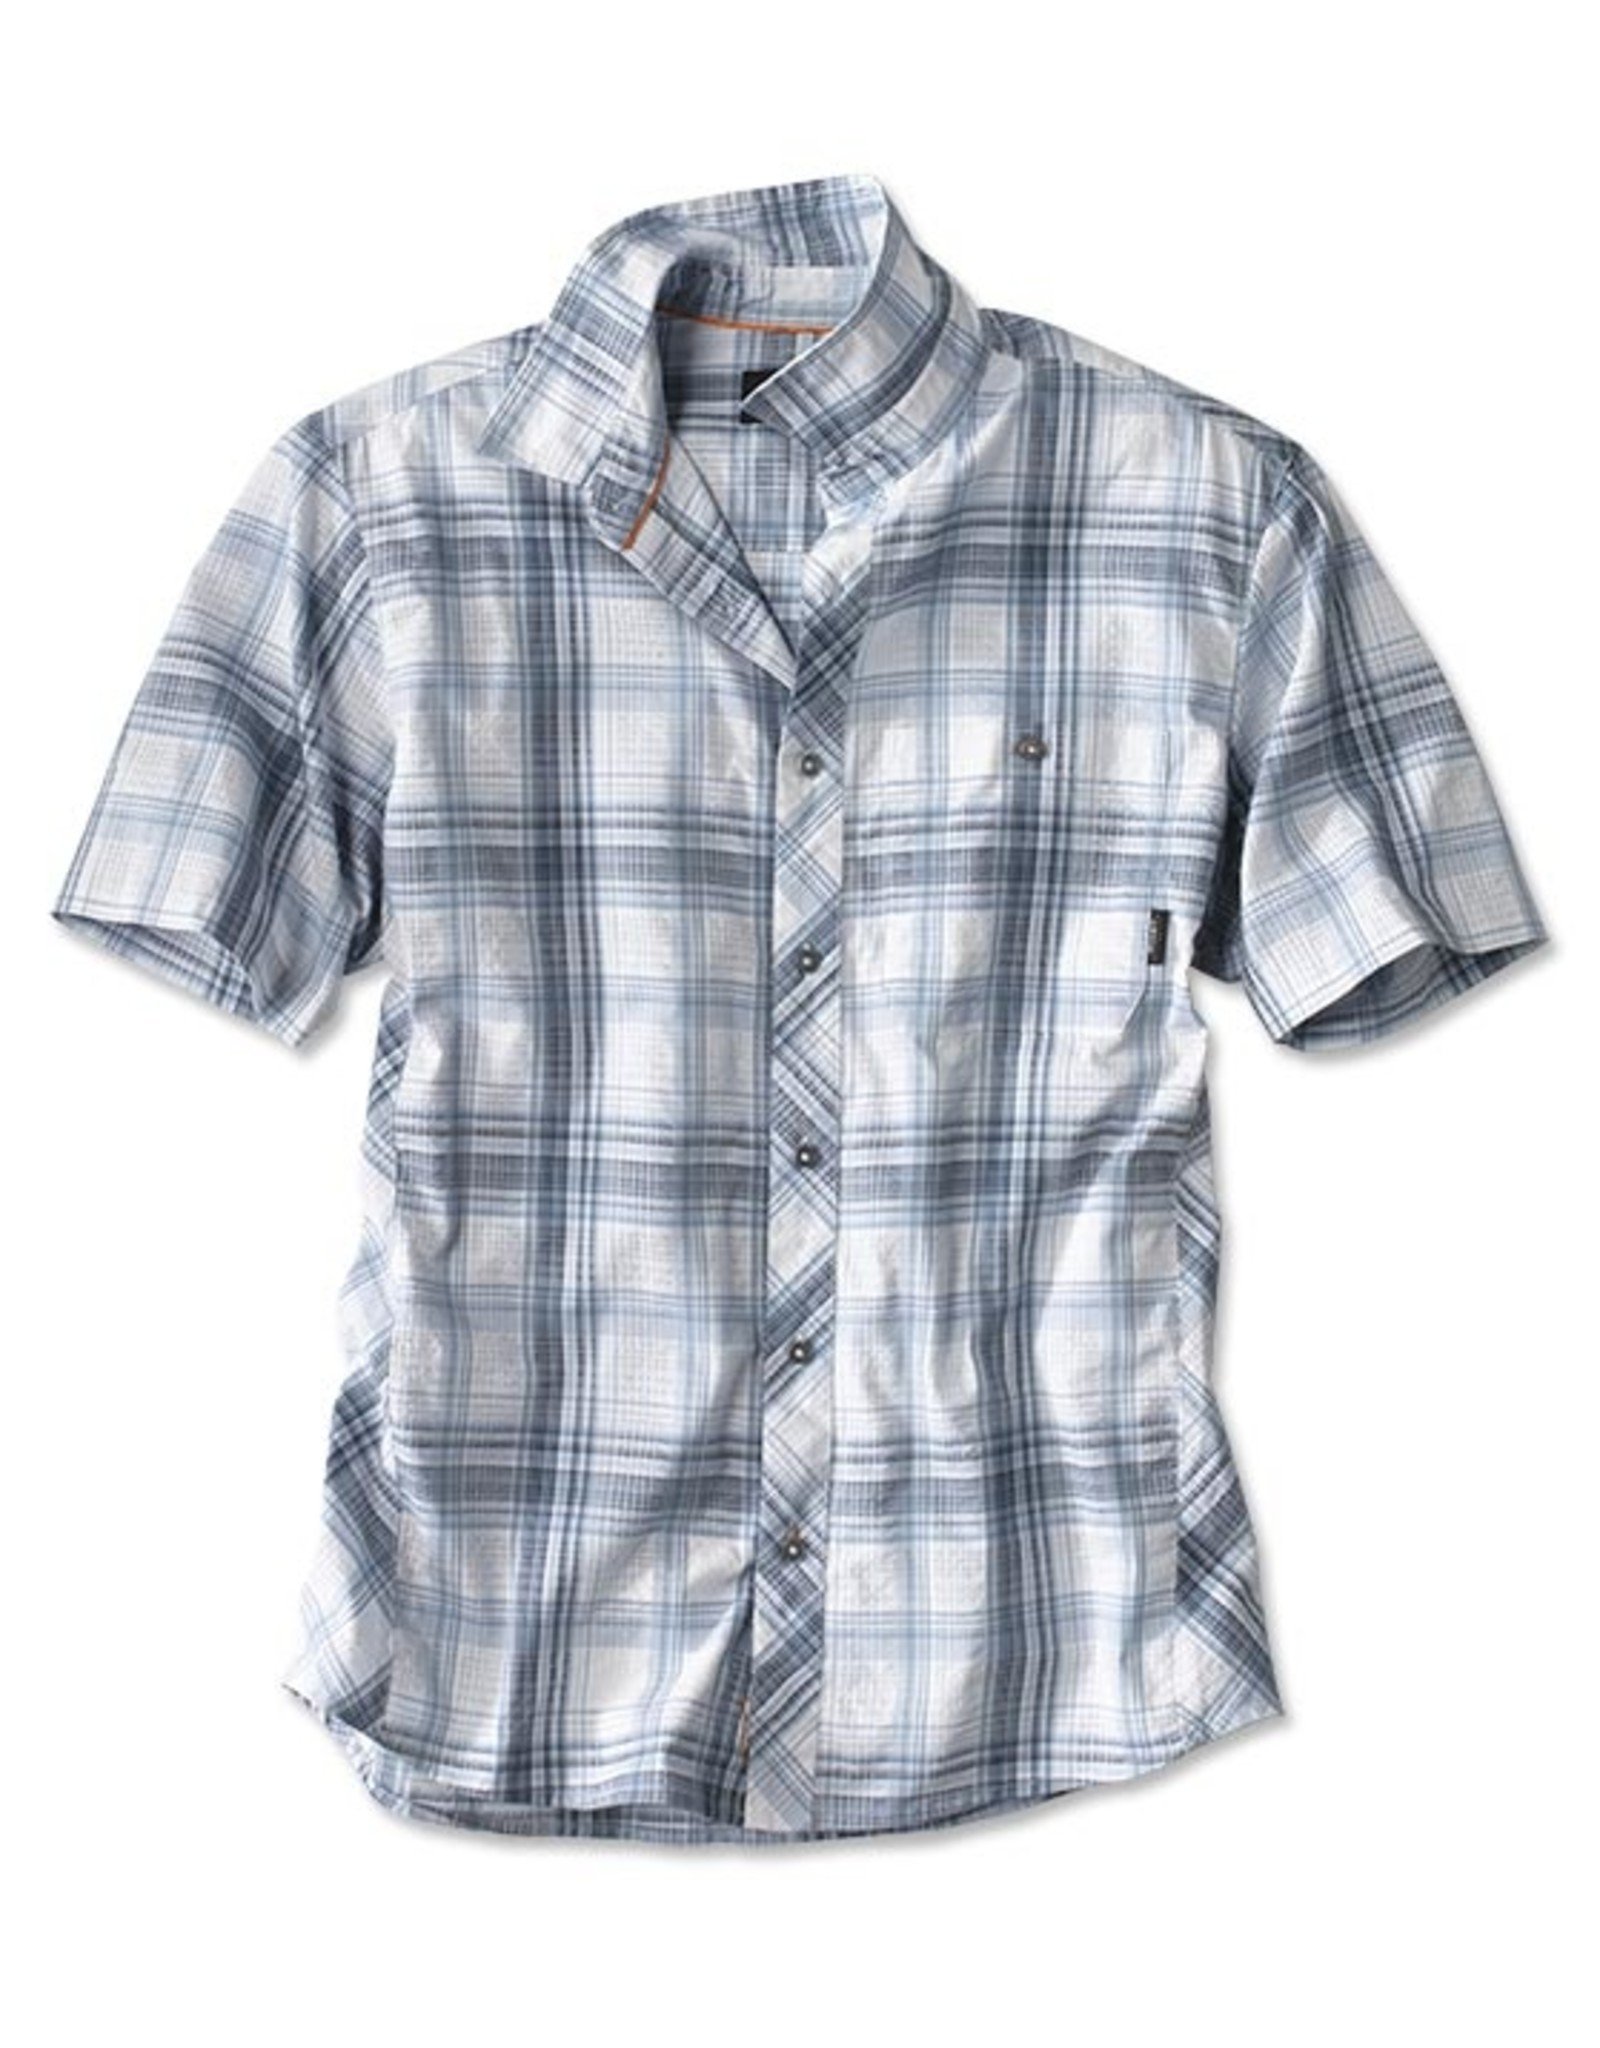 ORVIS Men's Aerated Plaid Short-Sleeved Camp Shirt